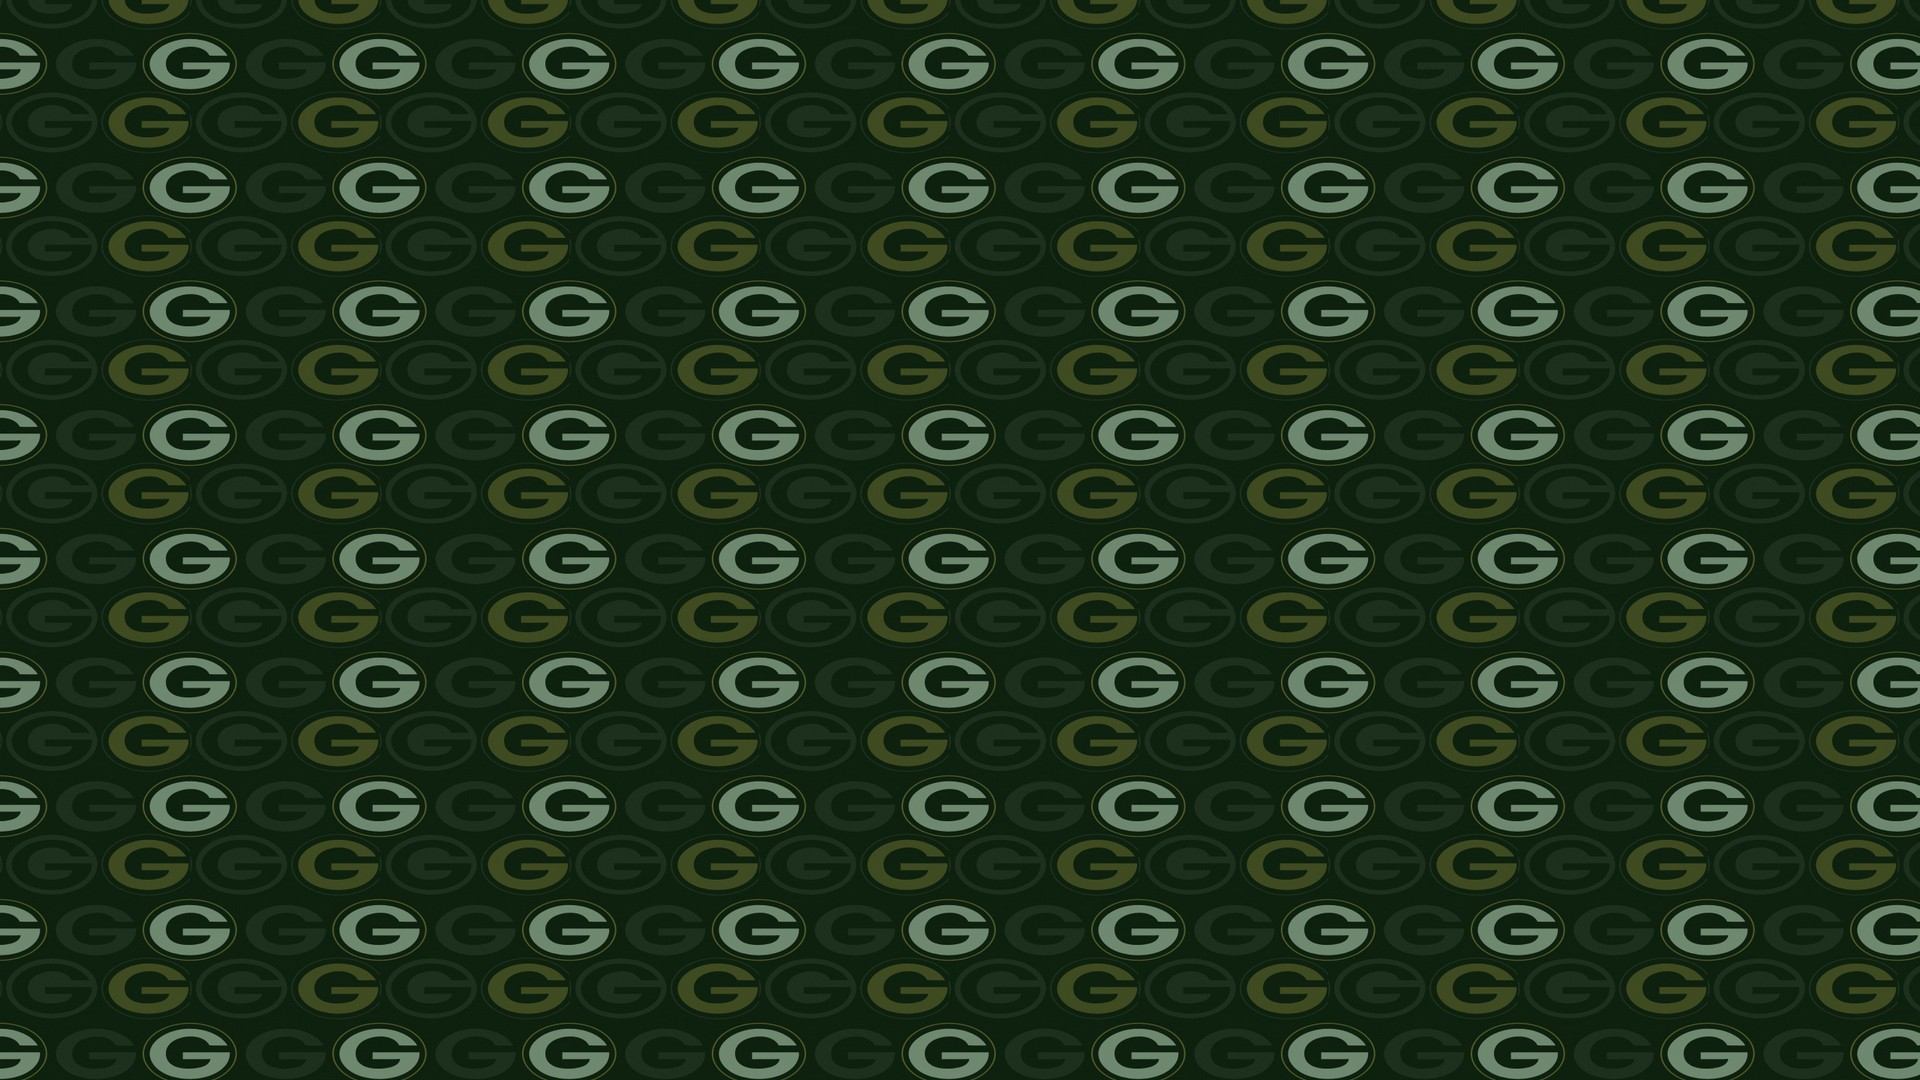 Green Bay Packers Logo Wallpaper HD With high-resolution 1920X1080 pixel. You can use this wallpaper for your Mac or Windows Desktop Background, iPhone, Android or Tablet and another Smartphone device